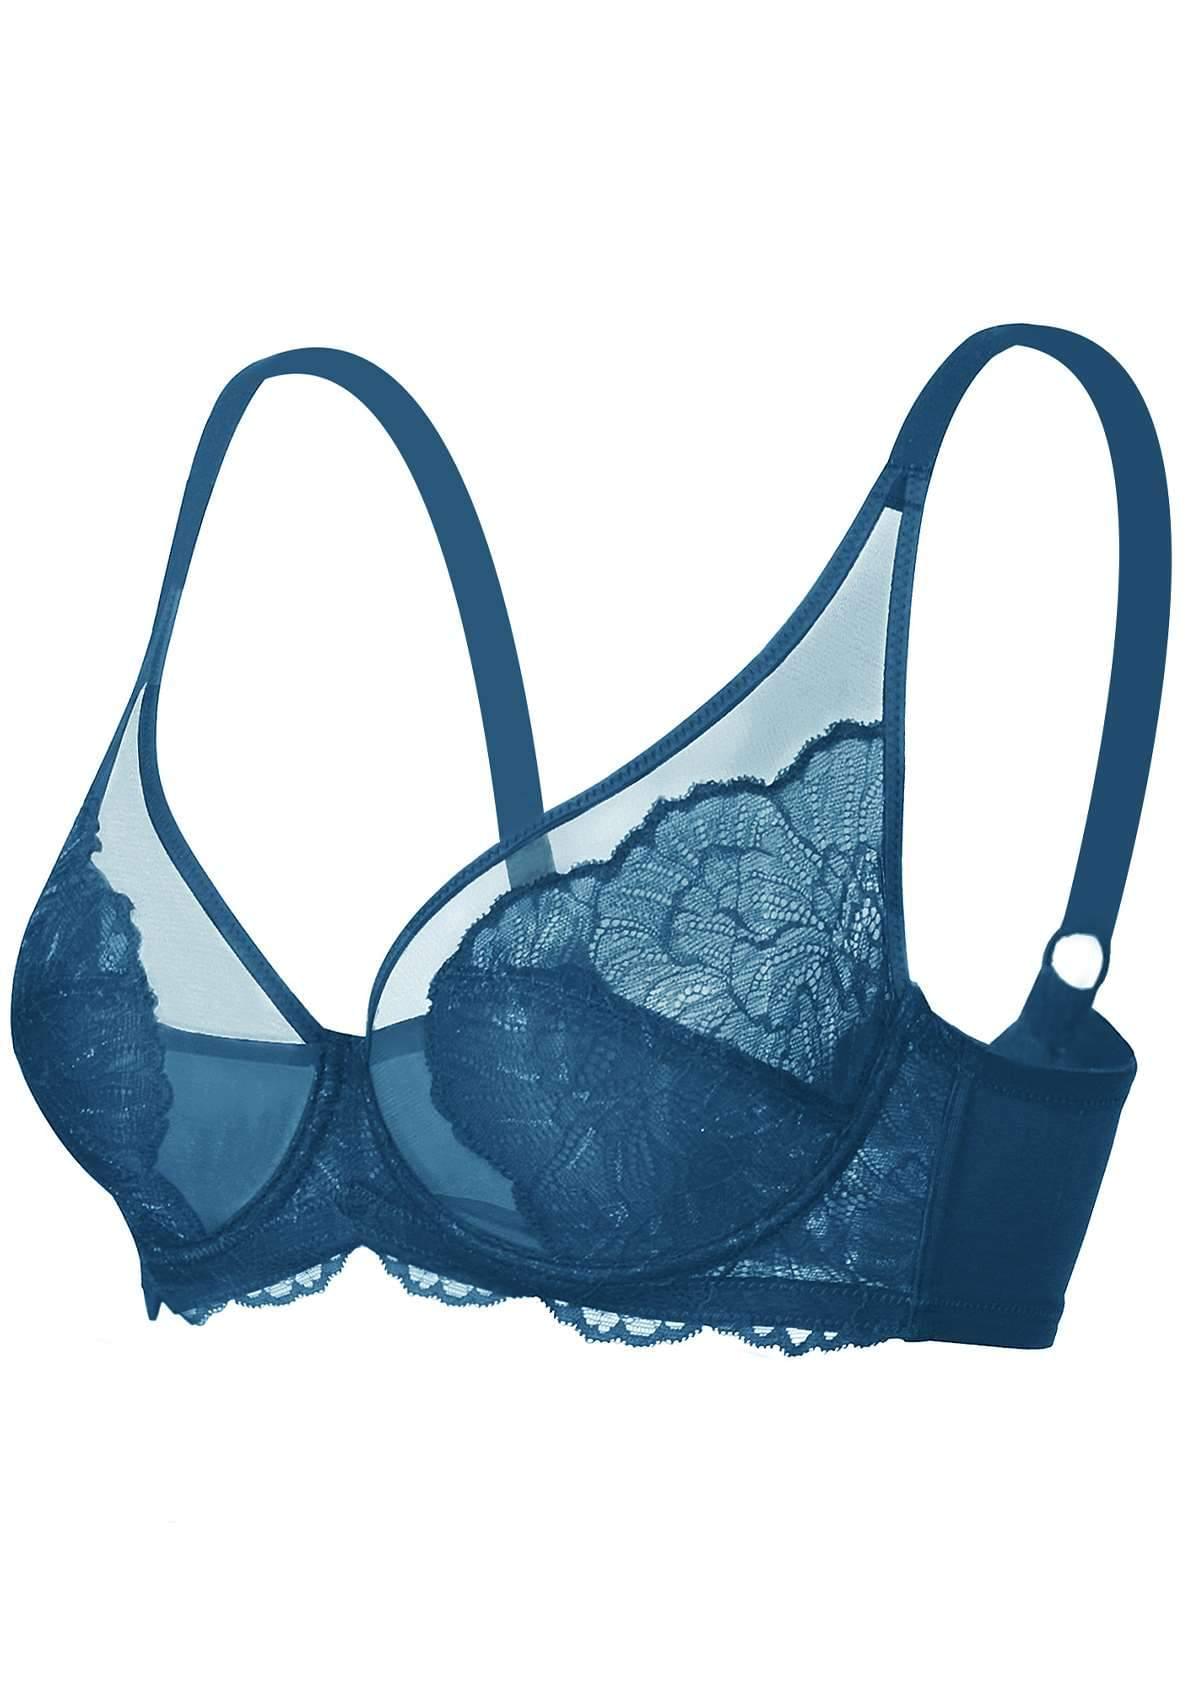 HSIA Blossom Lace Bra And Underwear Sets: Comfortable Plus Size Bra - Biscay Blue / 38 / D